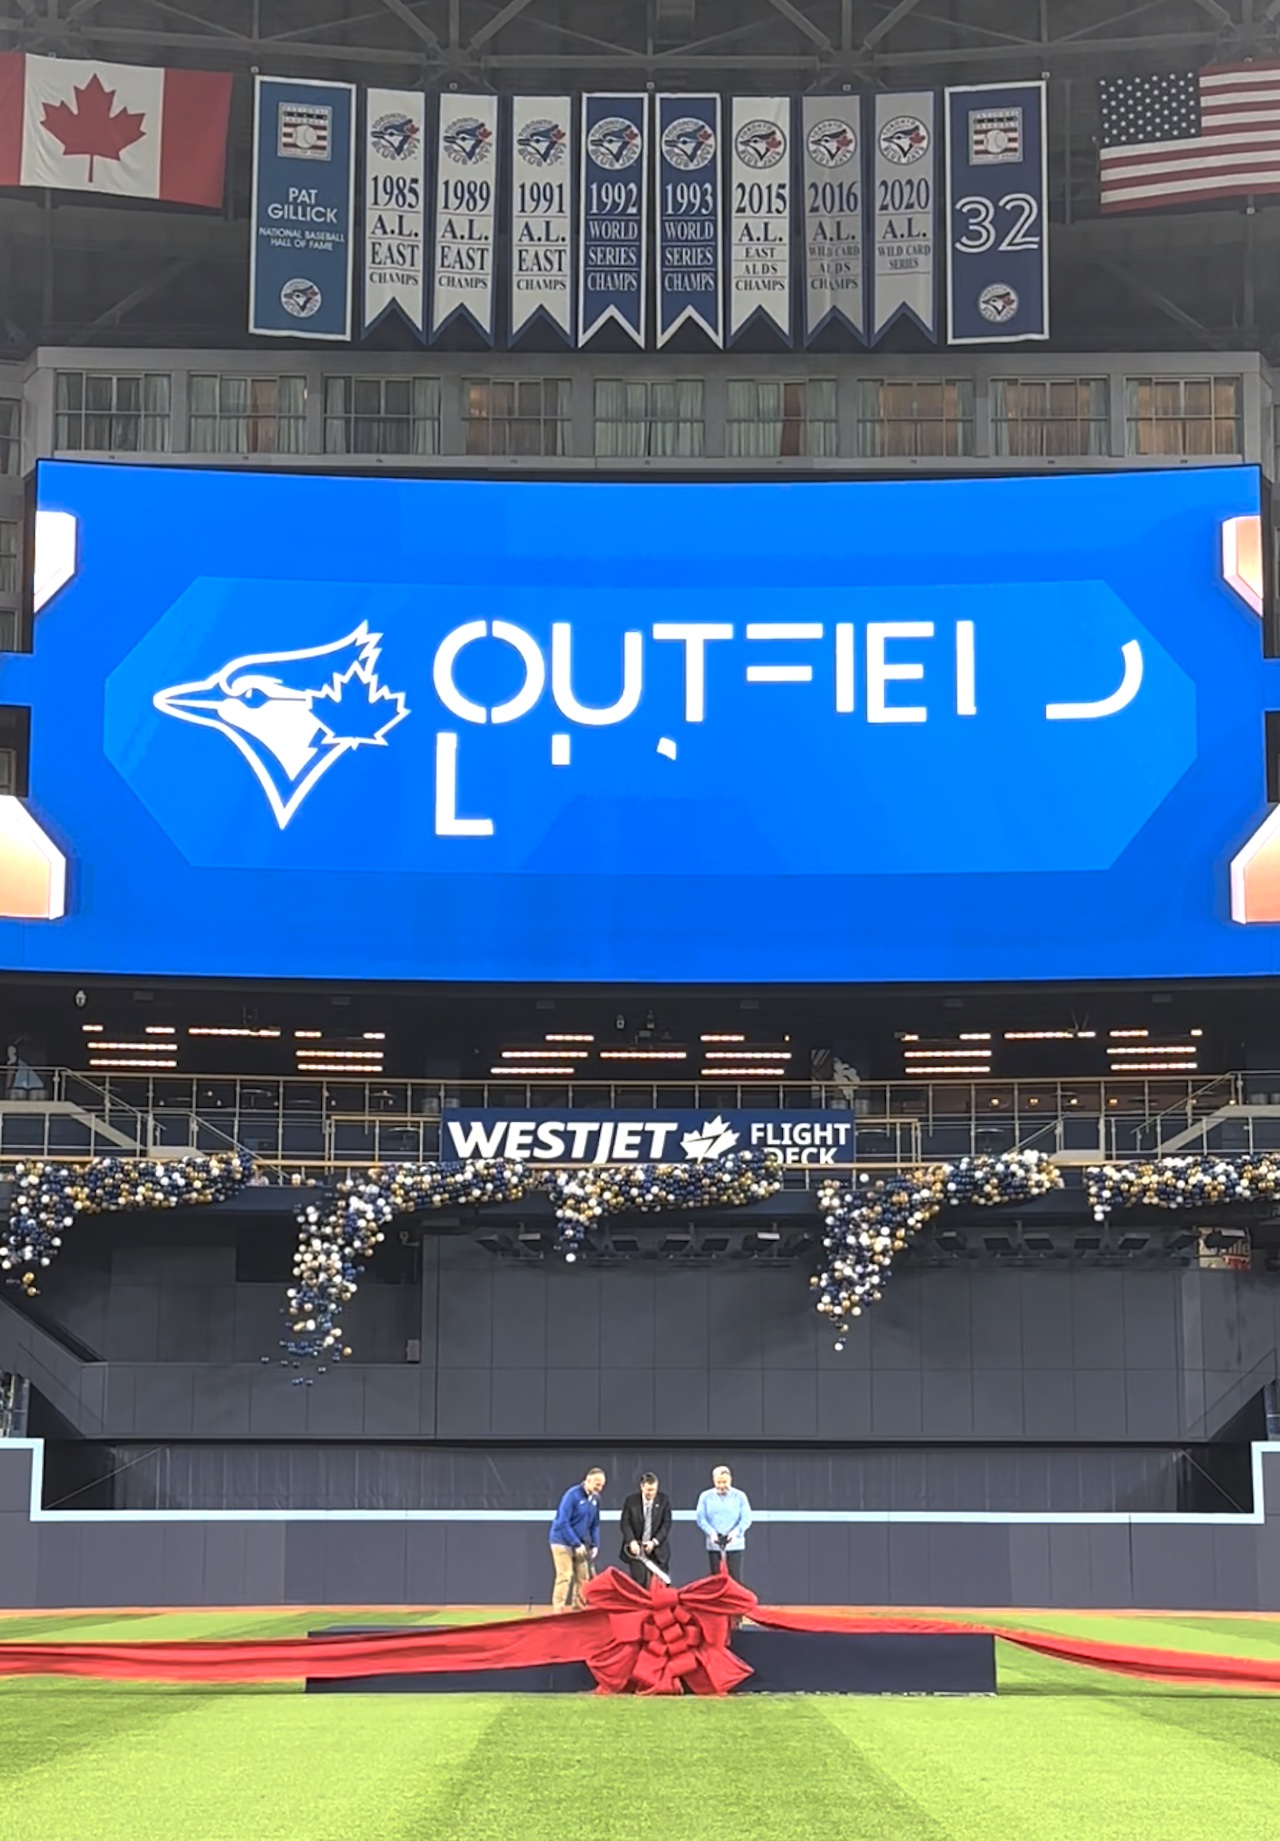 Rogers Centre renovations wow Toronto Blue Jays fans at home